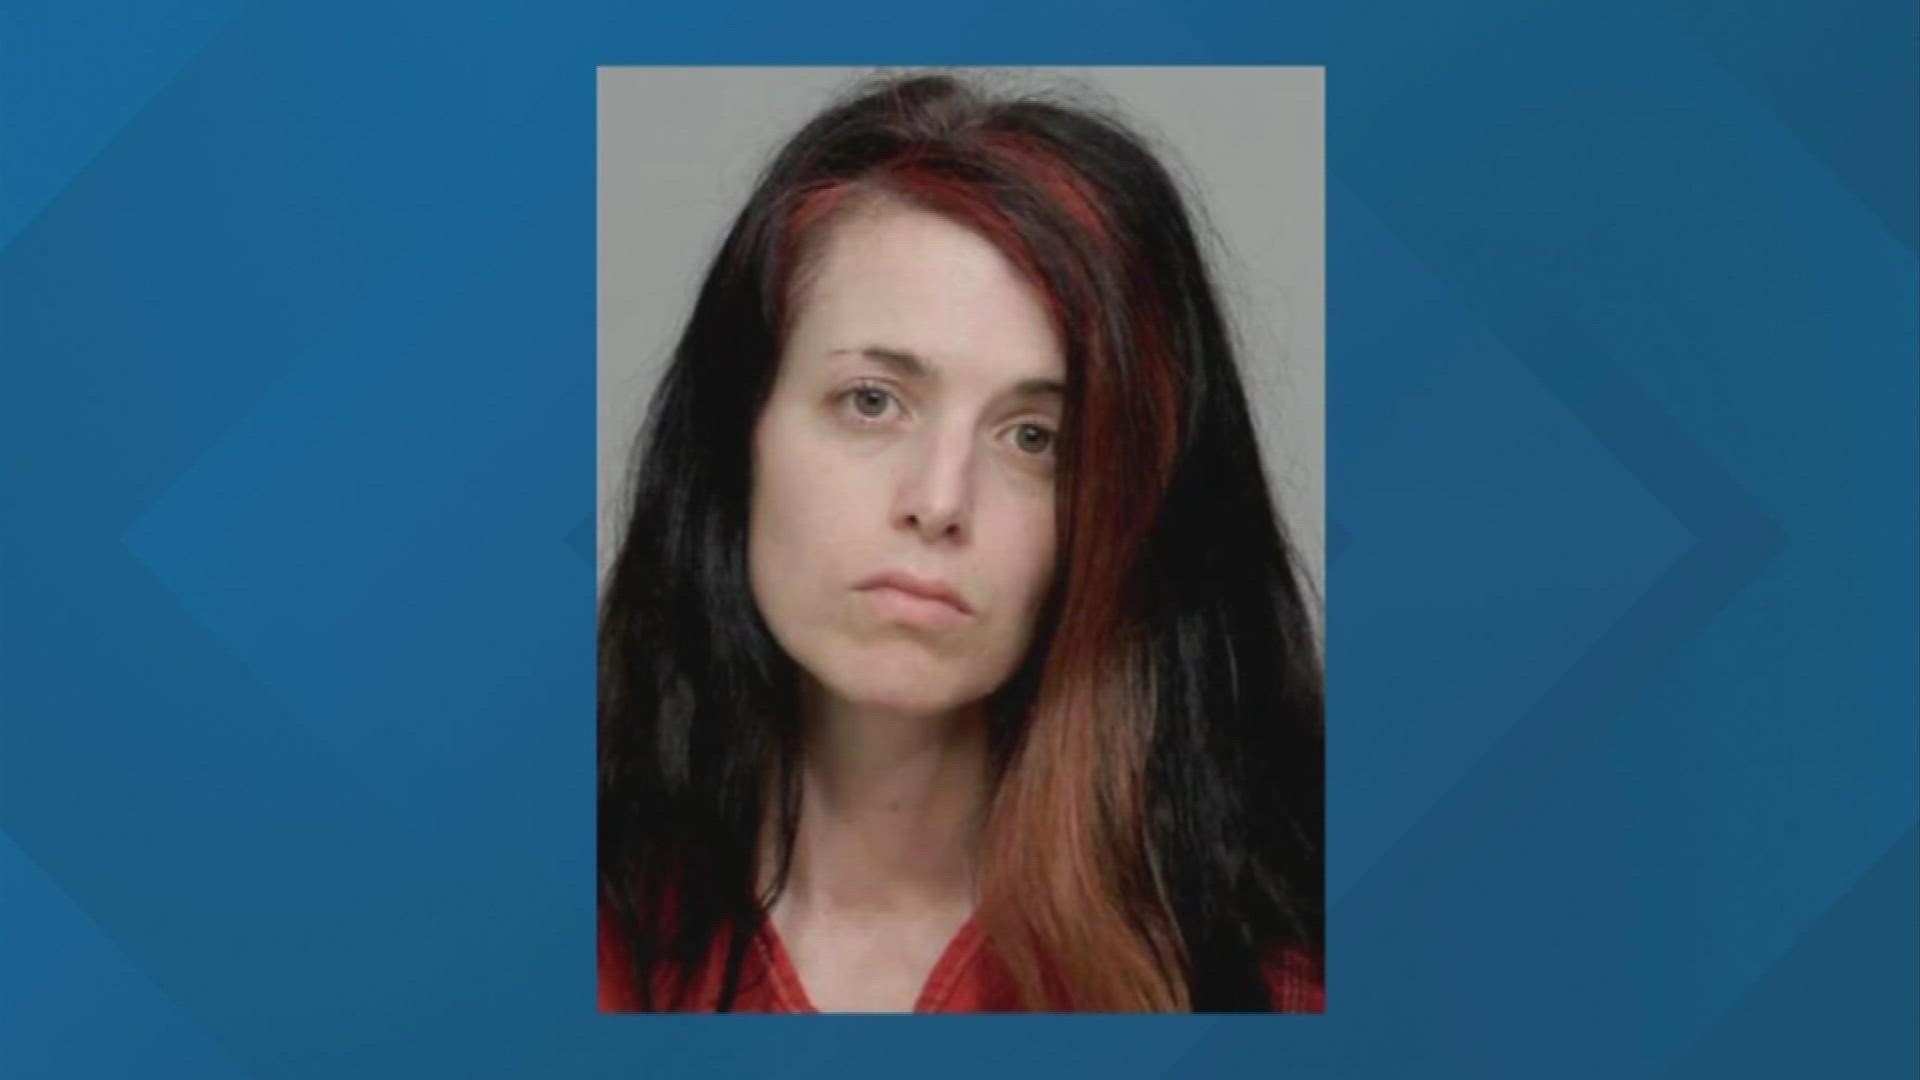 Mandy Davis, 33, was sentenced in Pickaway County Common Pleas Court to a minimum of 10 years in prison.